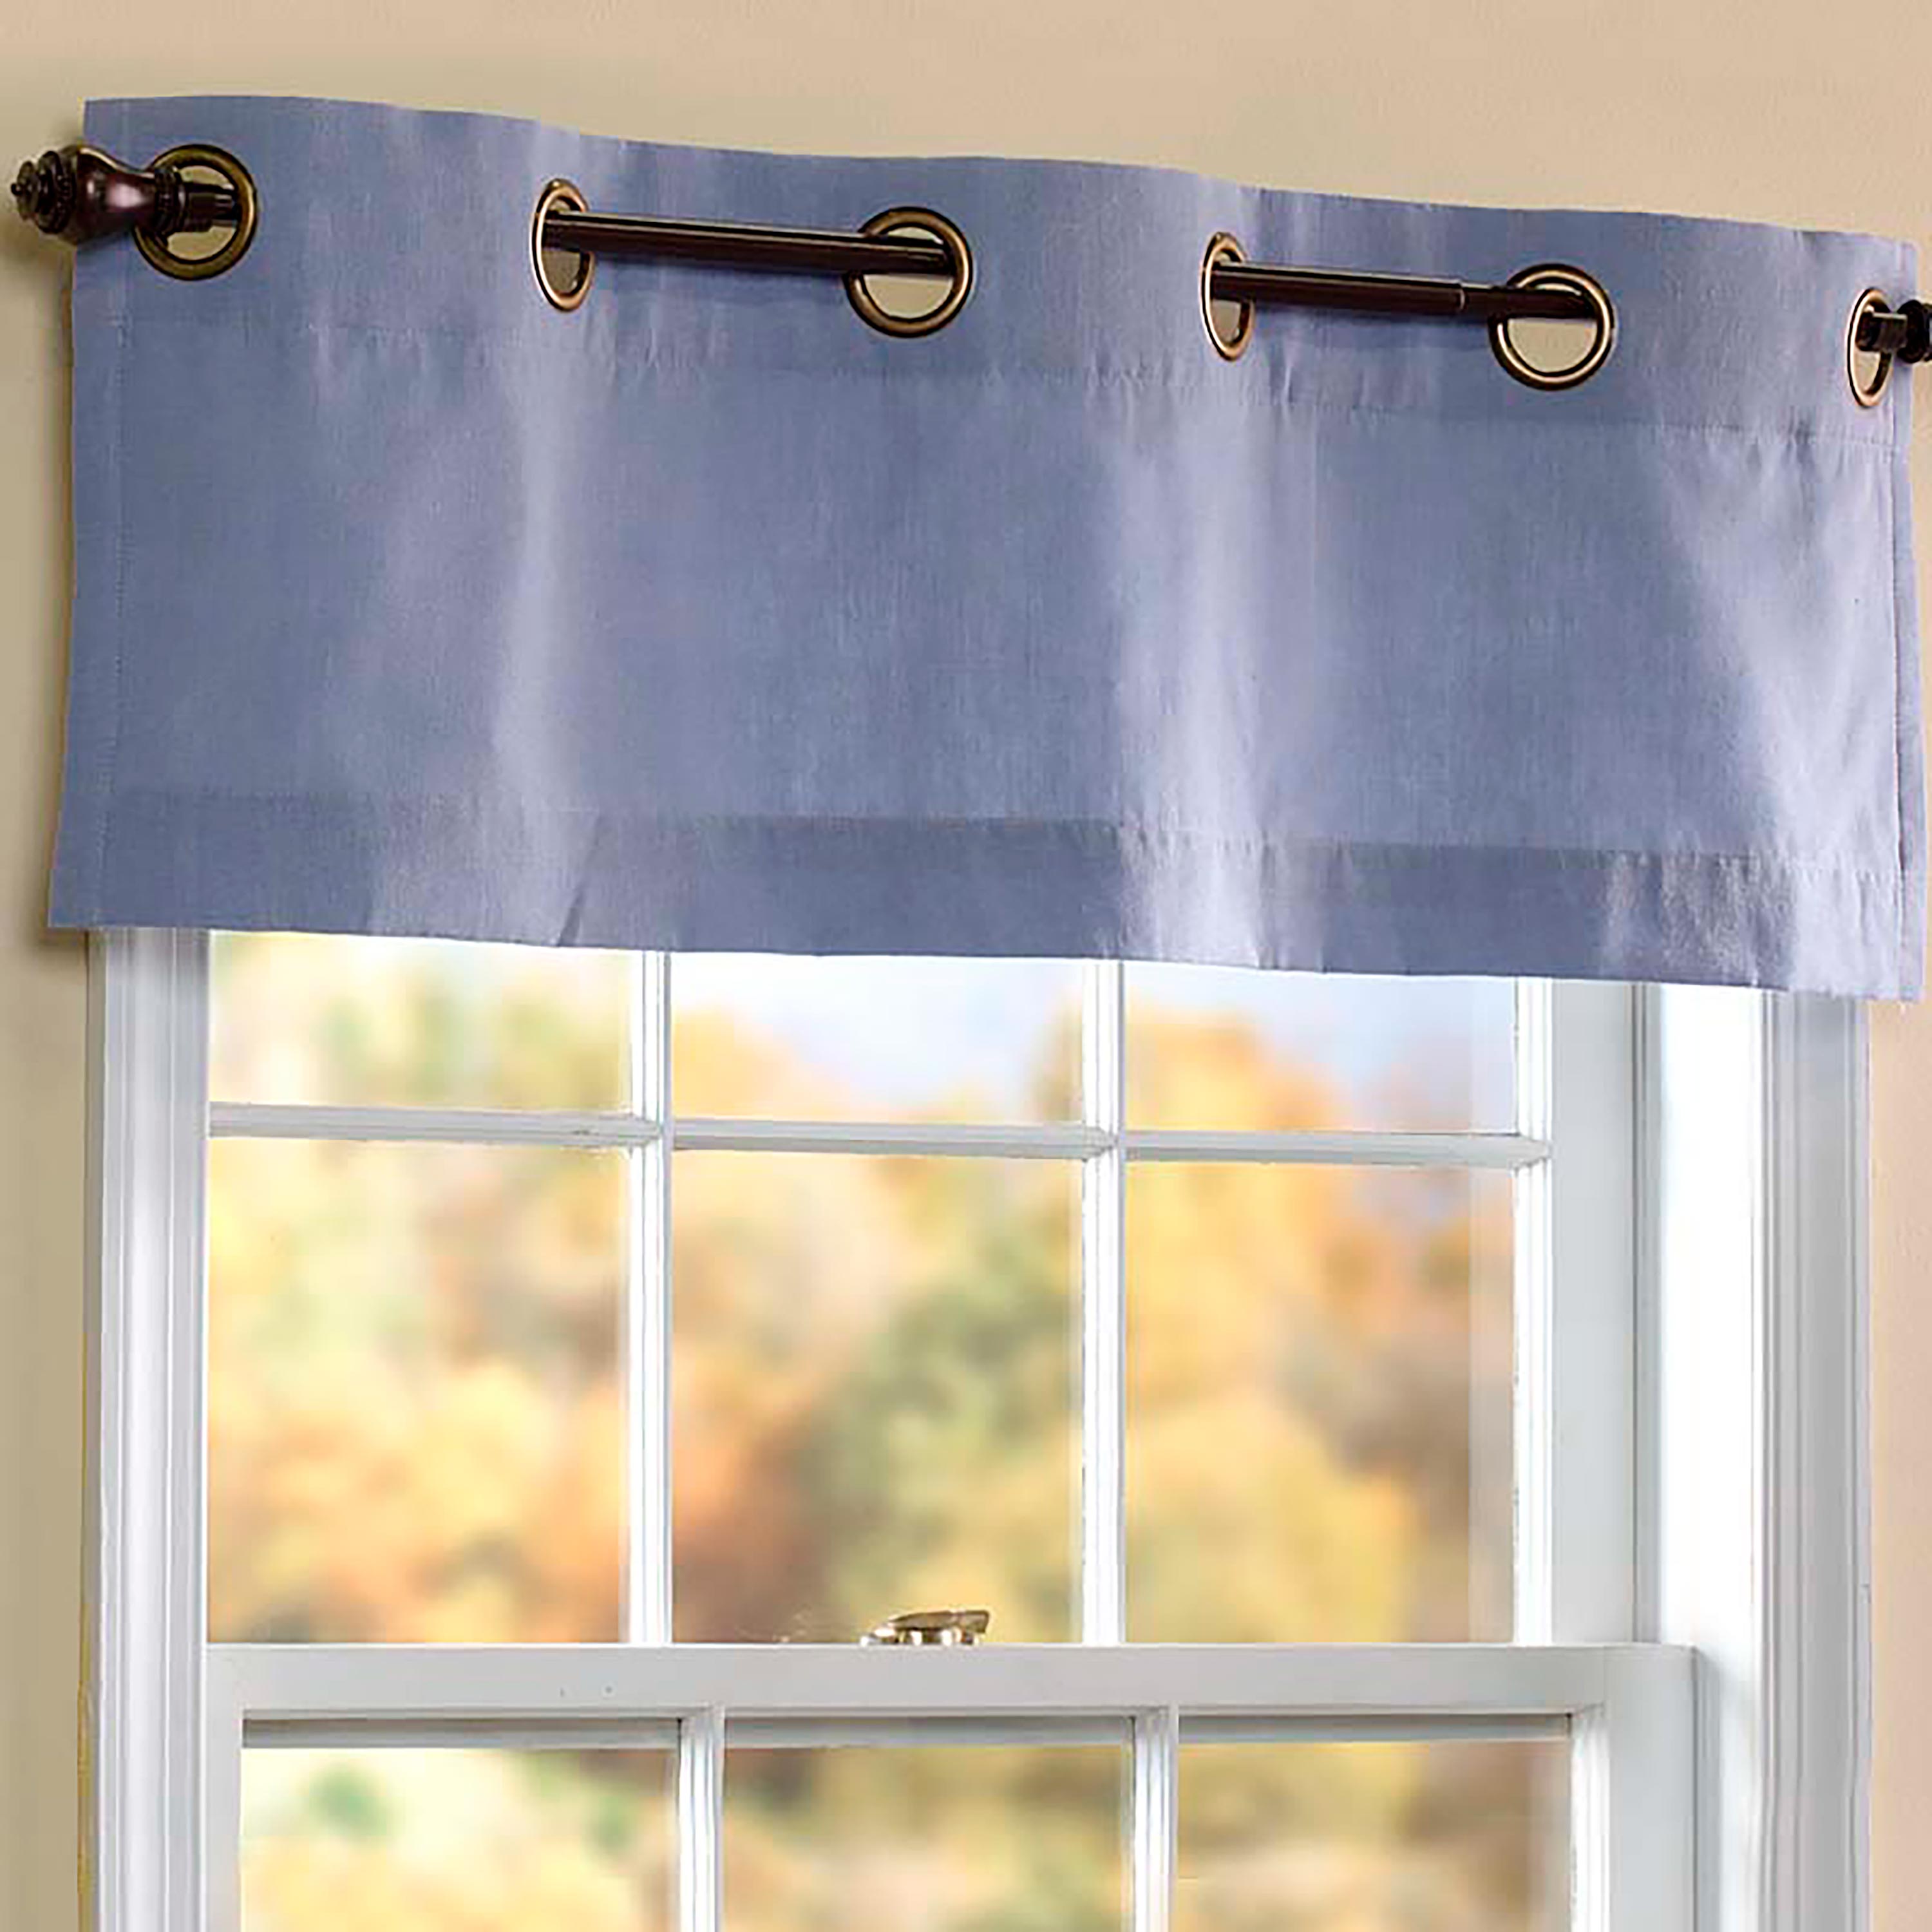 40"W x 14" L Double-Lined Grommet Curtain Valance, in Denim Blue